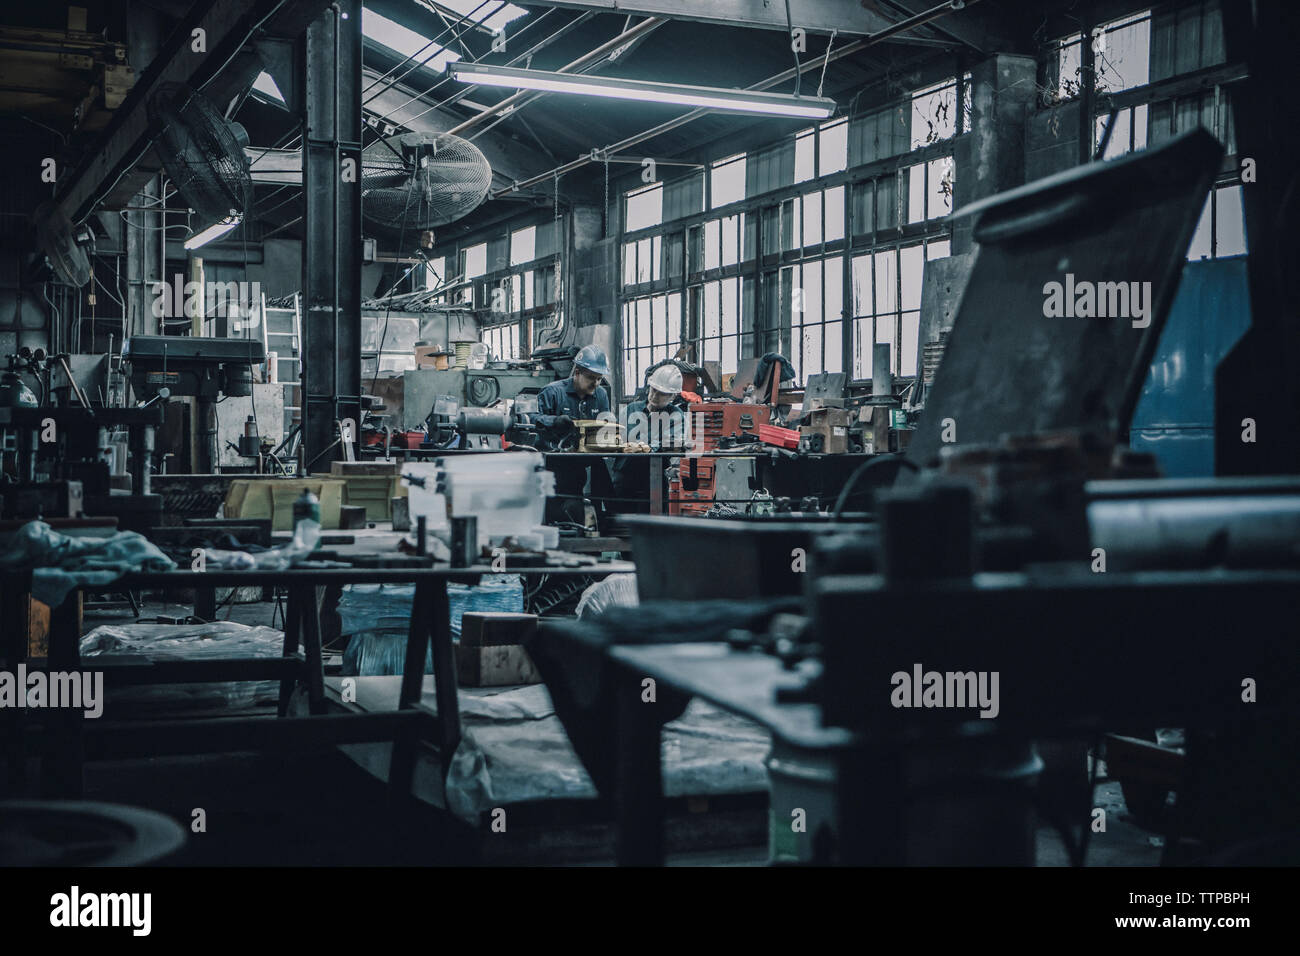 Mid distance view of workers working in metal industry Stock Photo